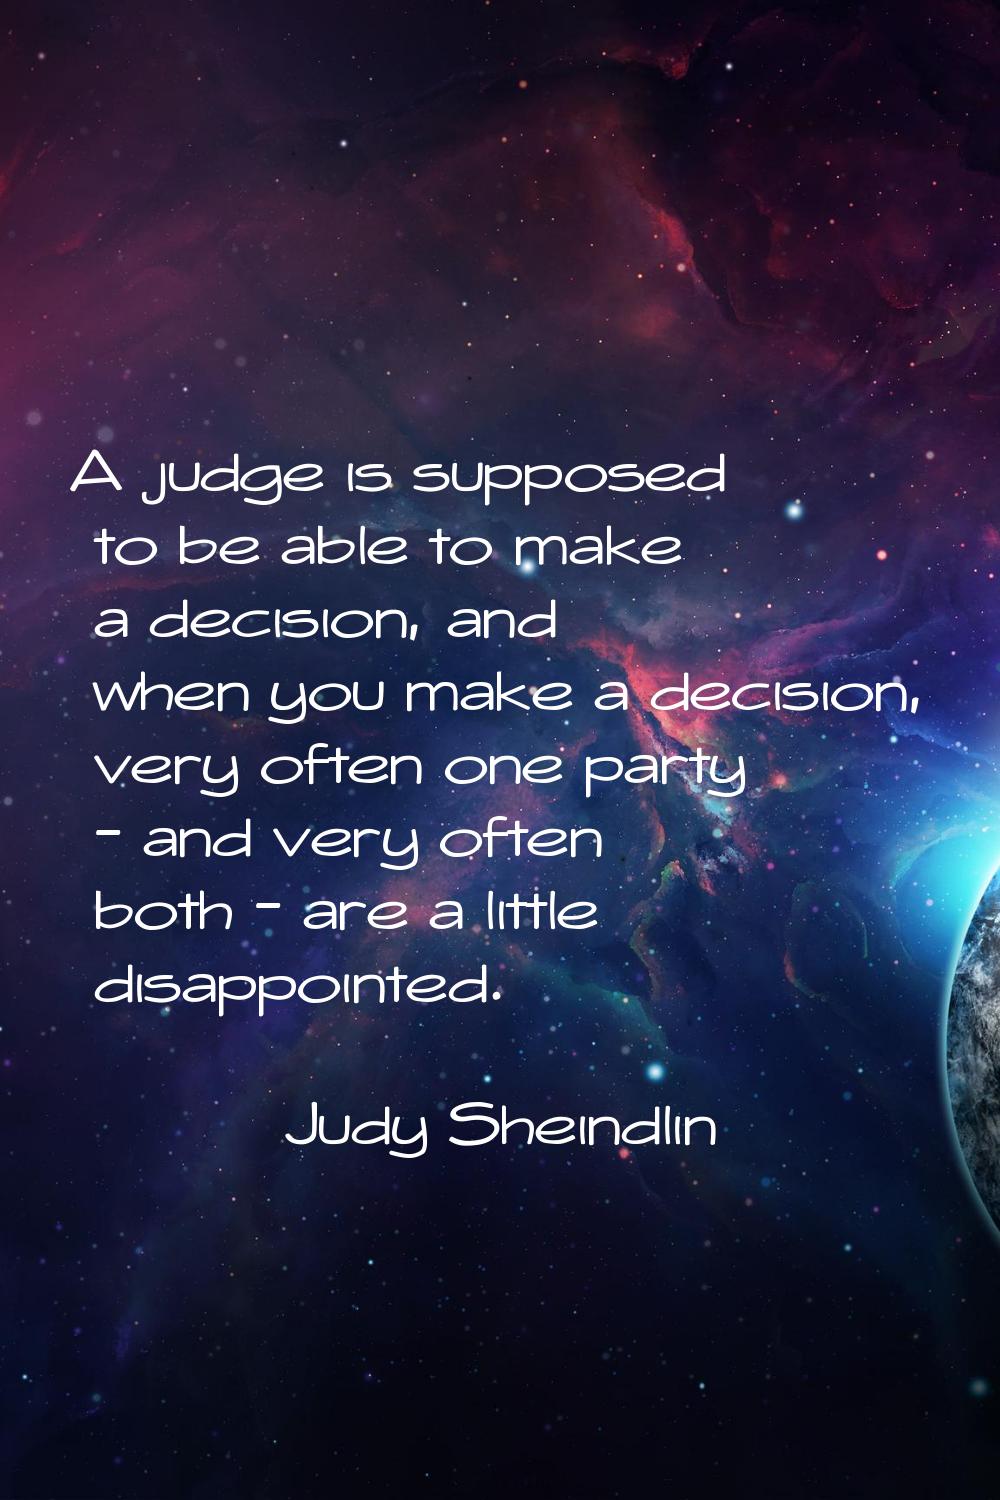 A judge is supposed to be able to make a decision, and when you make a decision, very often one par